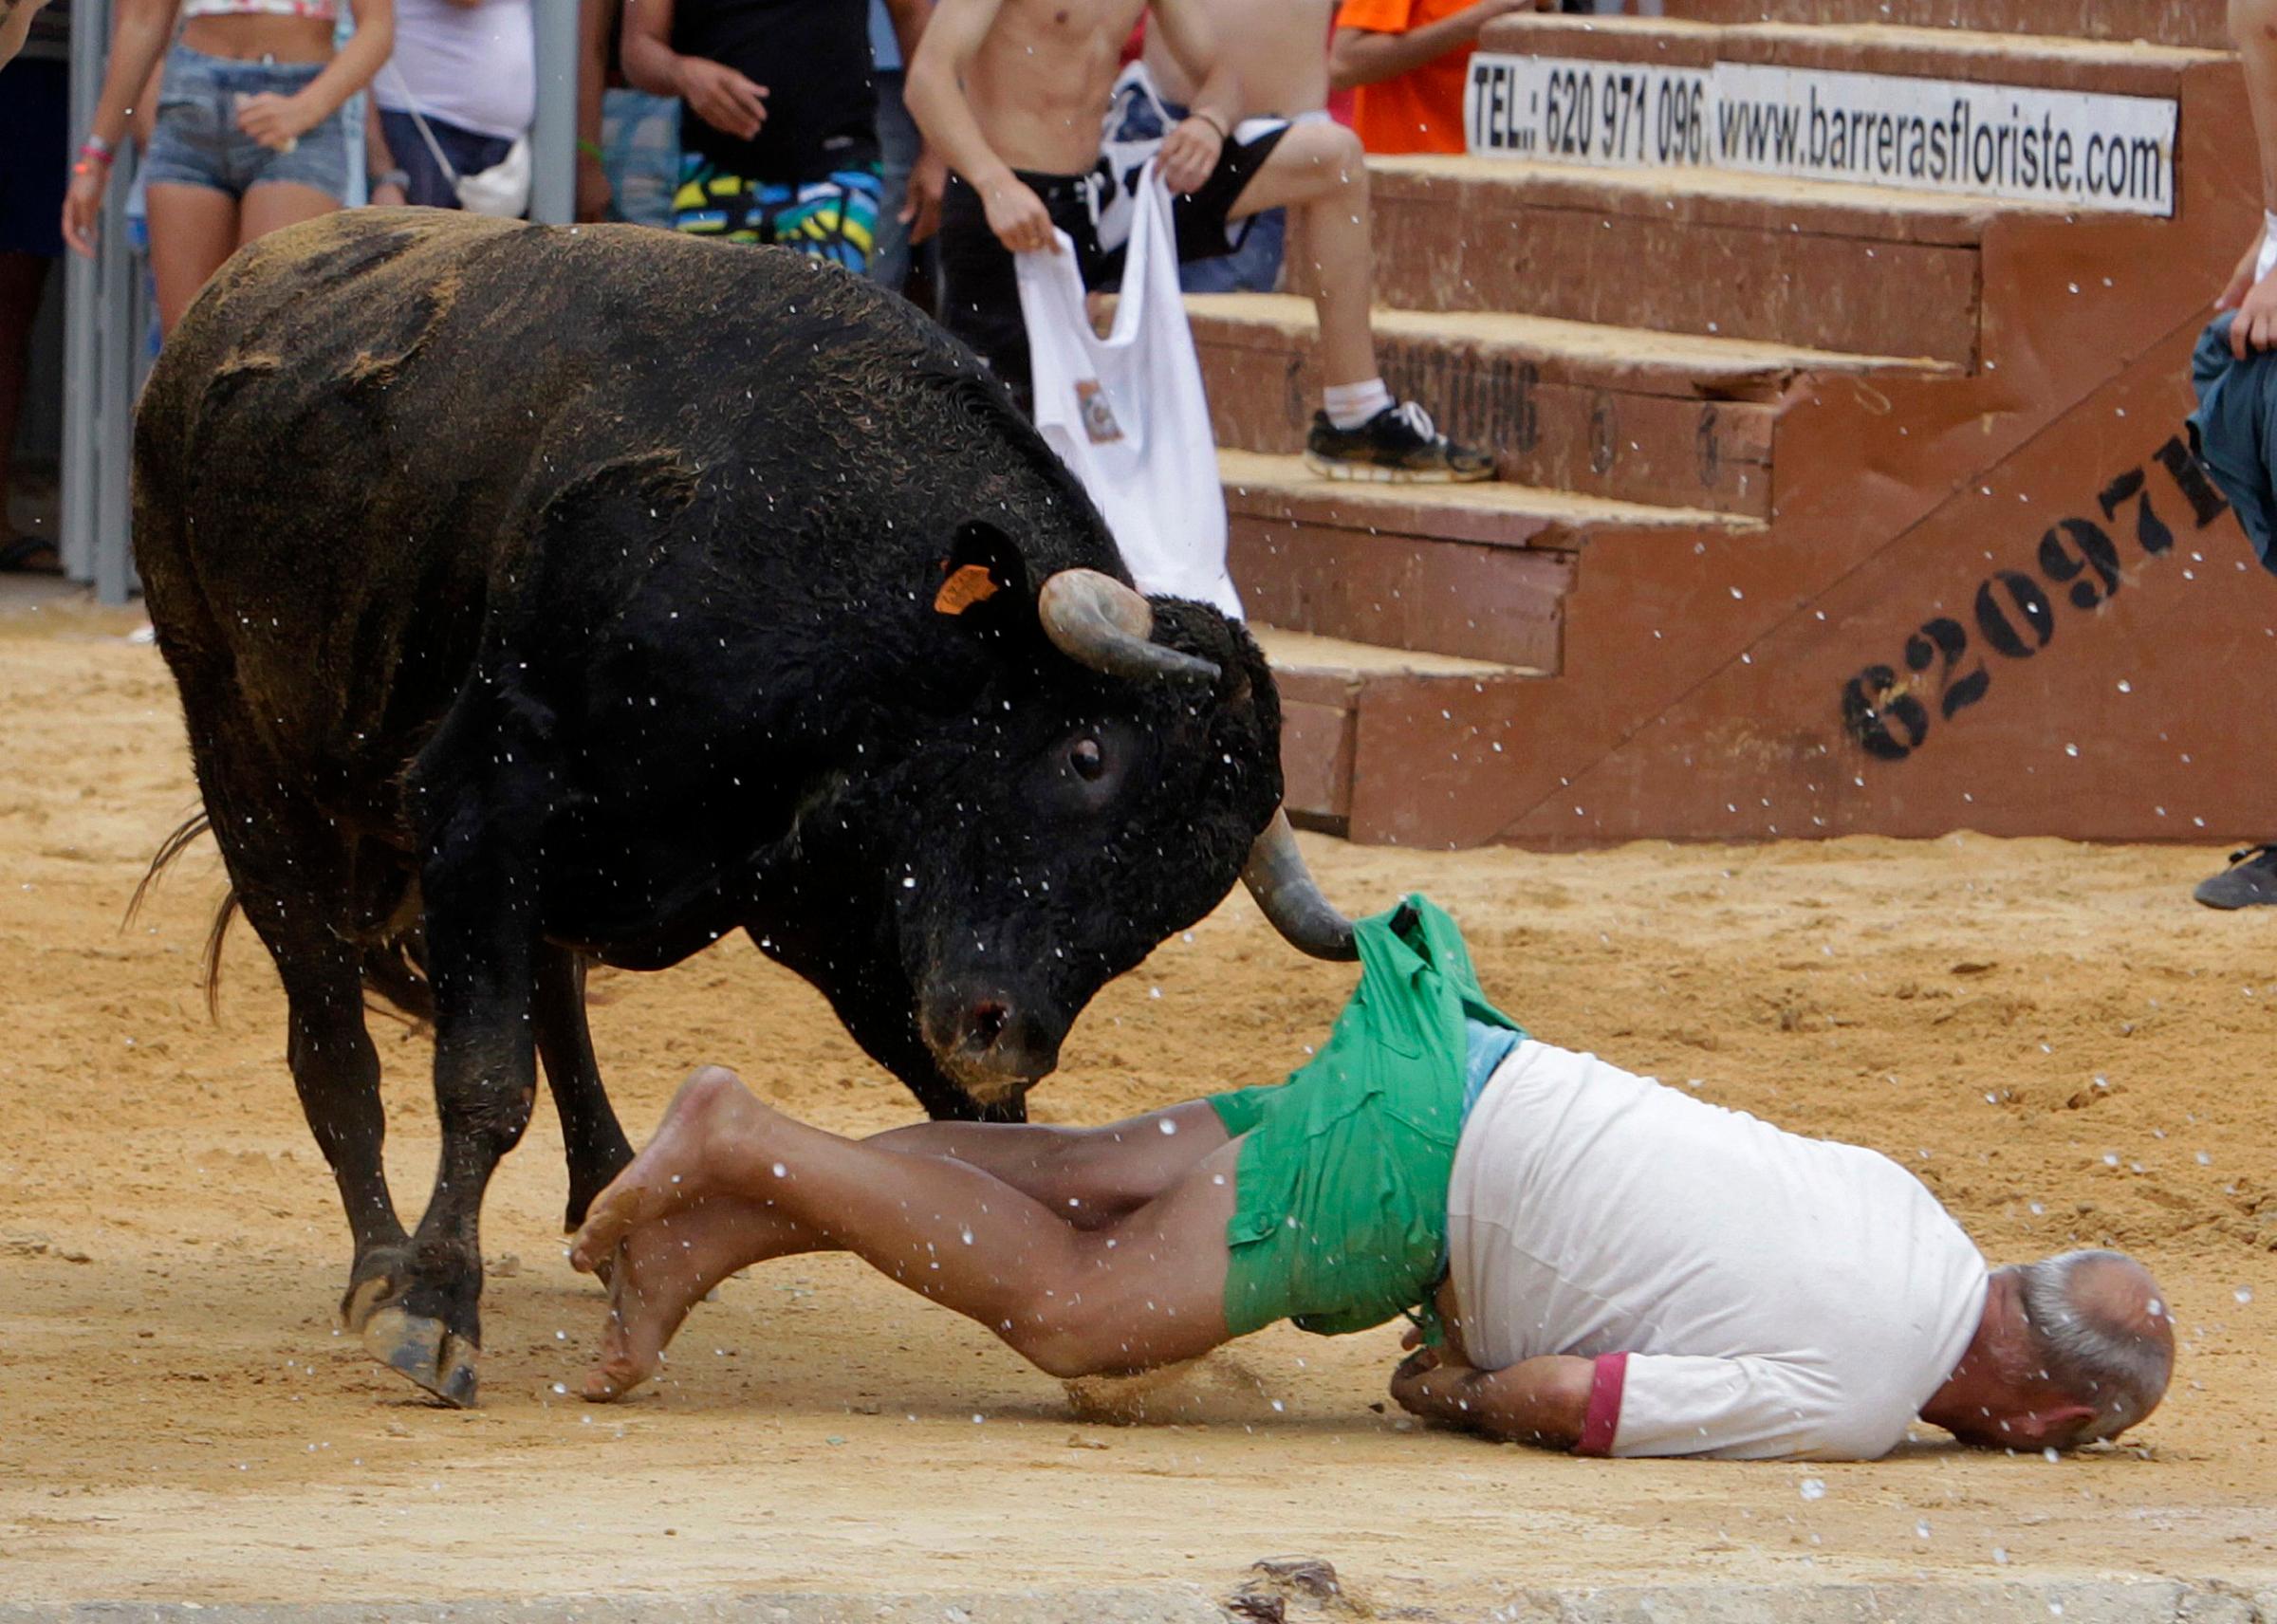 A reveller gets gored by a bull during the "Bous a la Mar" festival in Denia